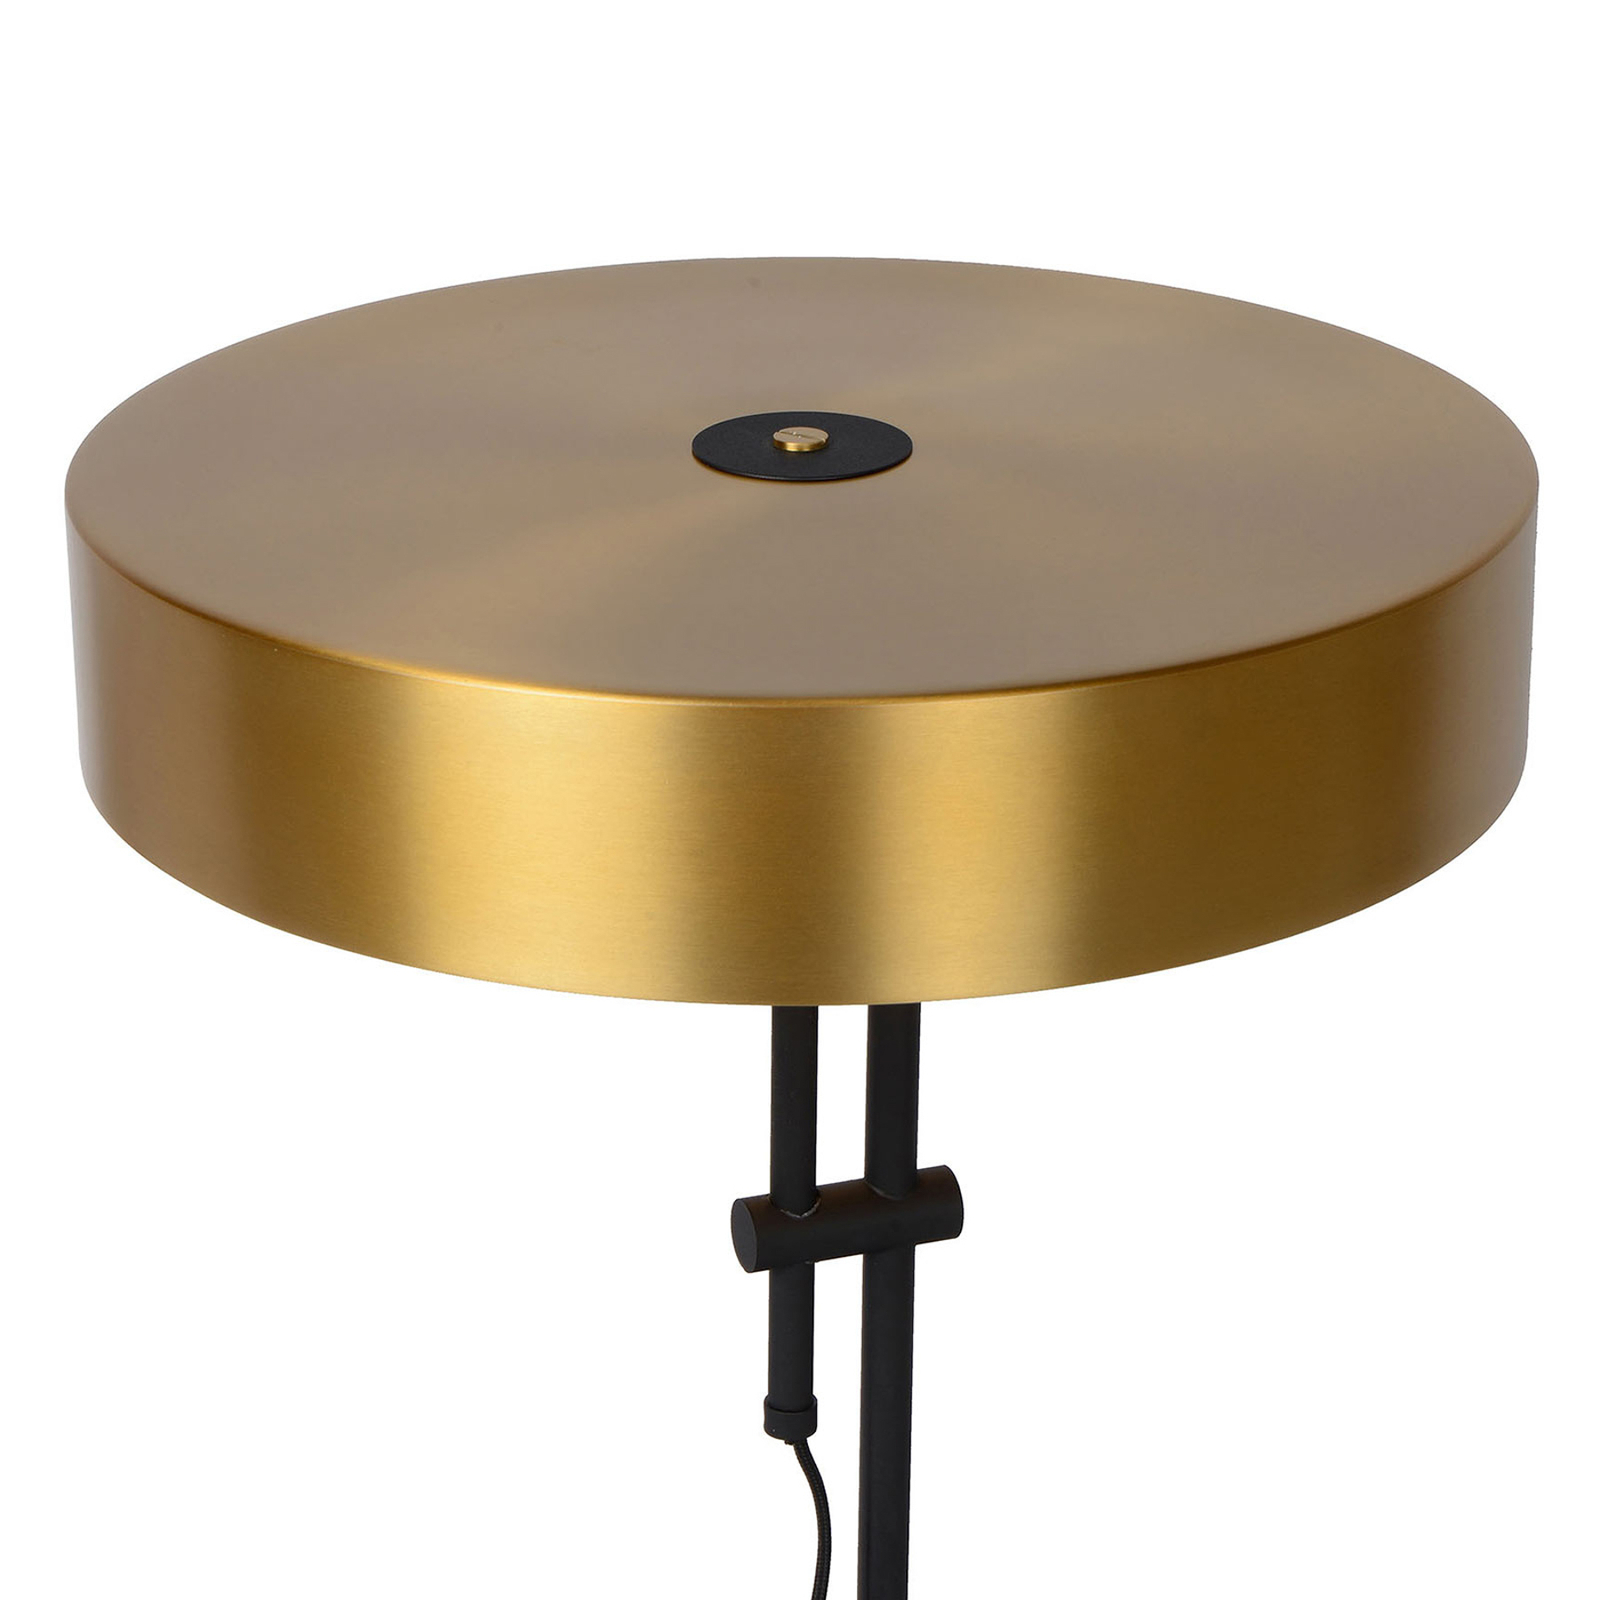 Giada table lamp with flat lampshade in gold